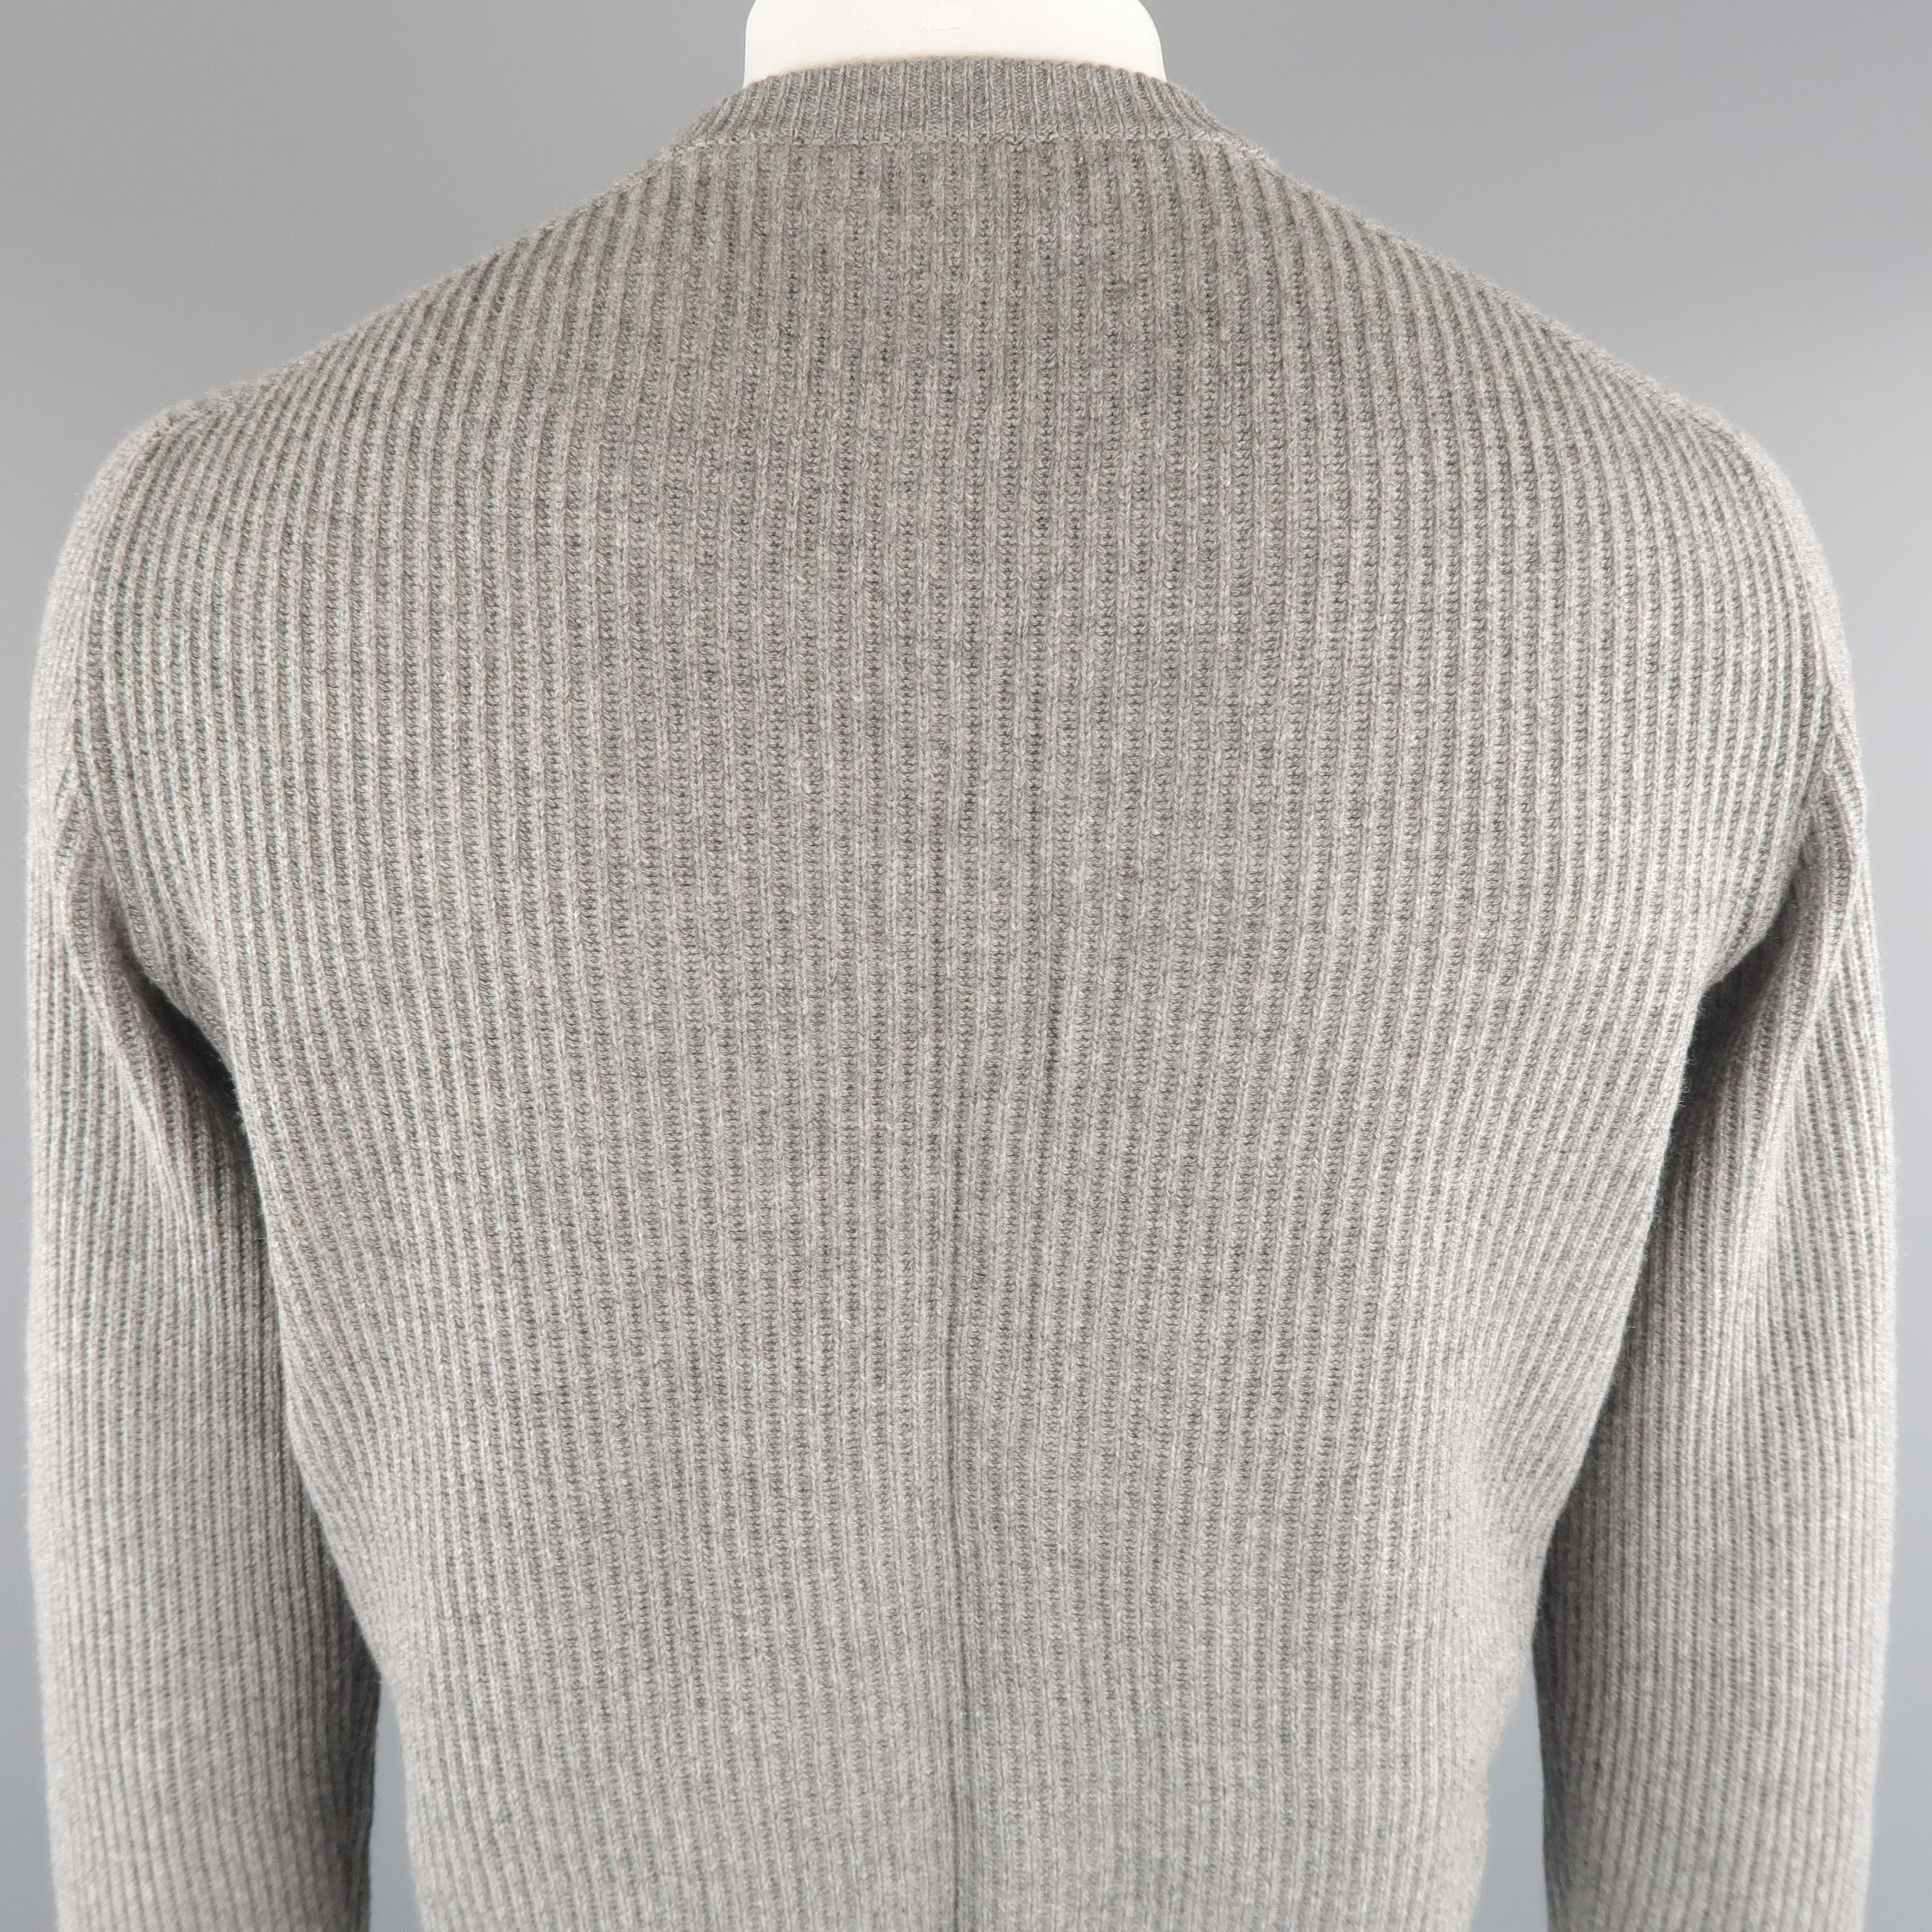 Men's BRUNELLO CUCINELLI Size 44 Grey Ribbed Knit Cashmere Sweater 1